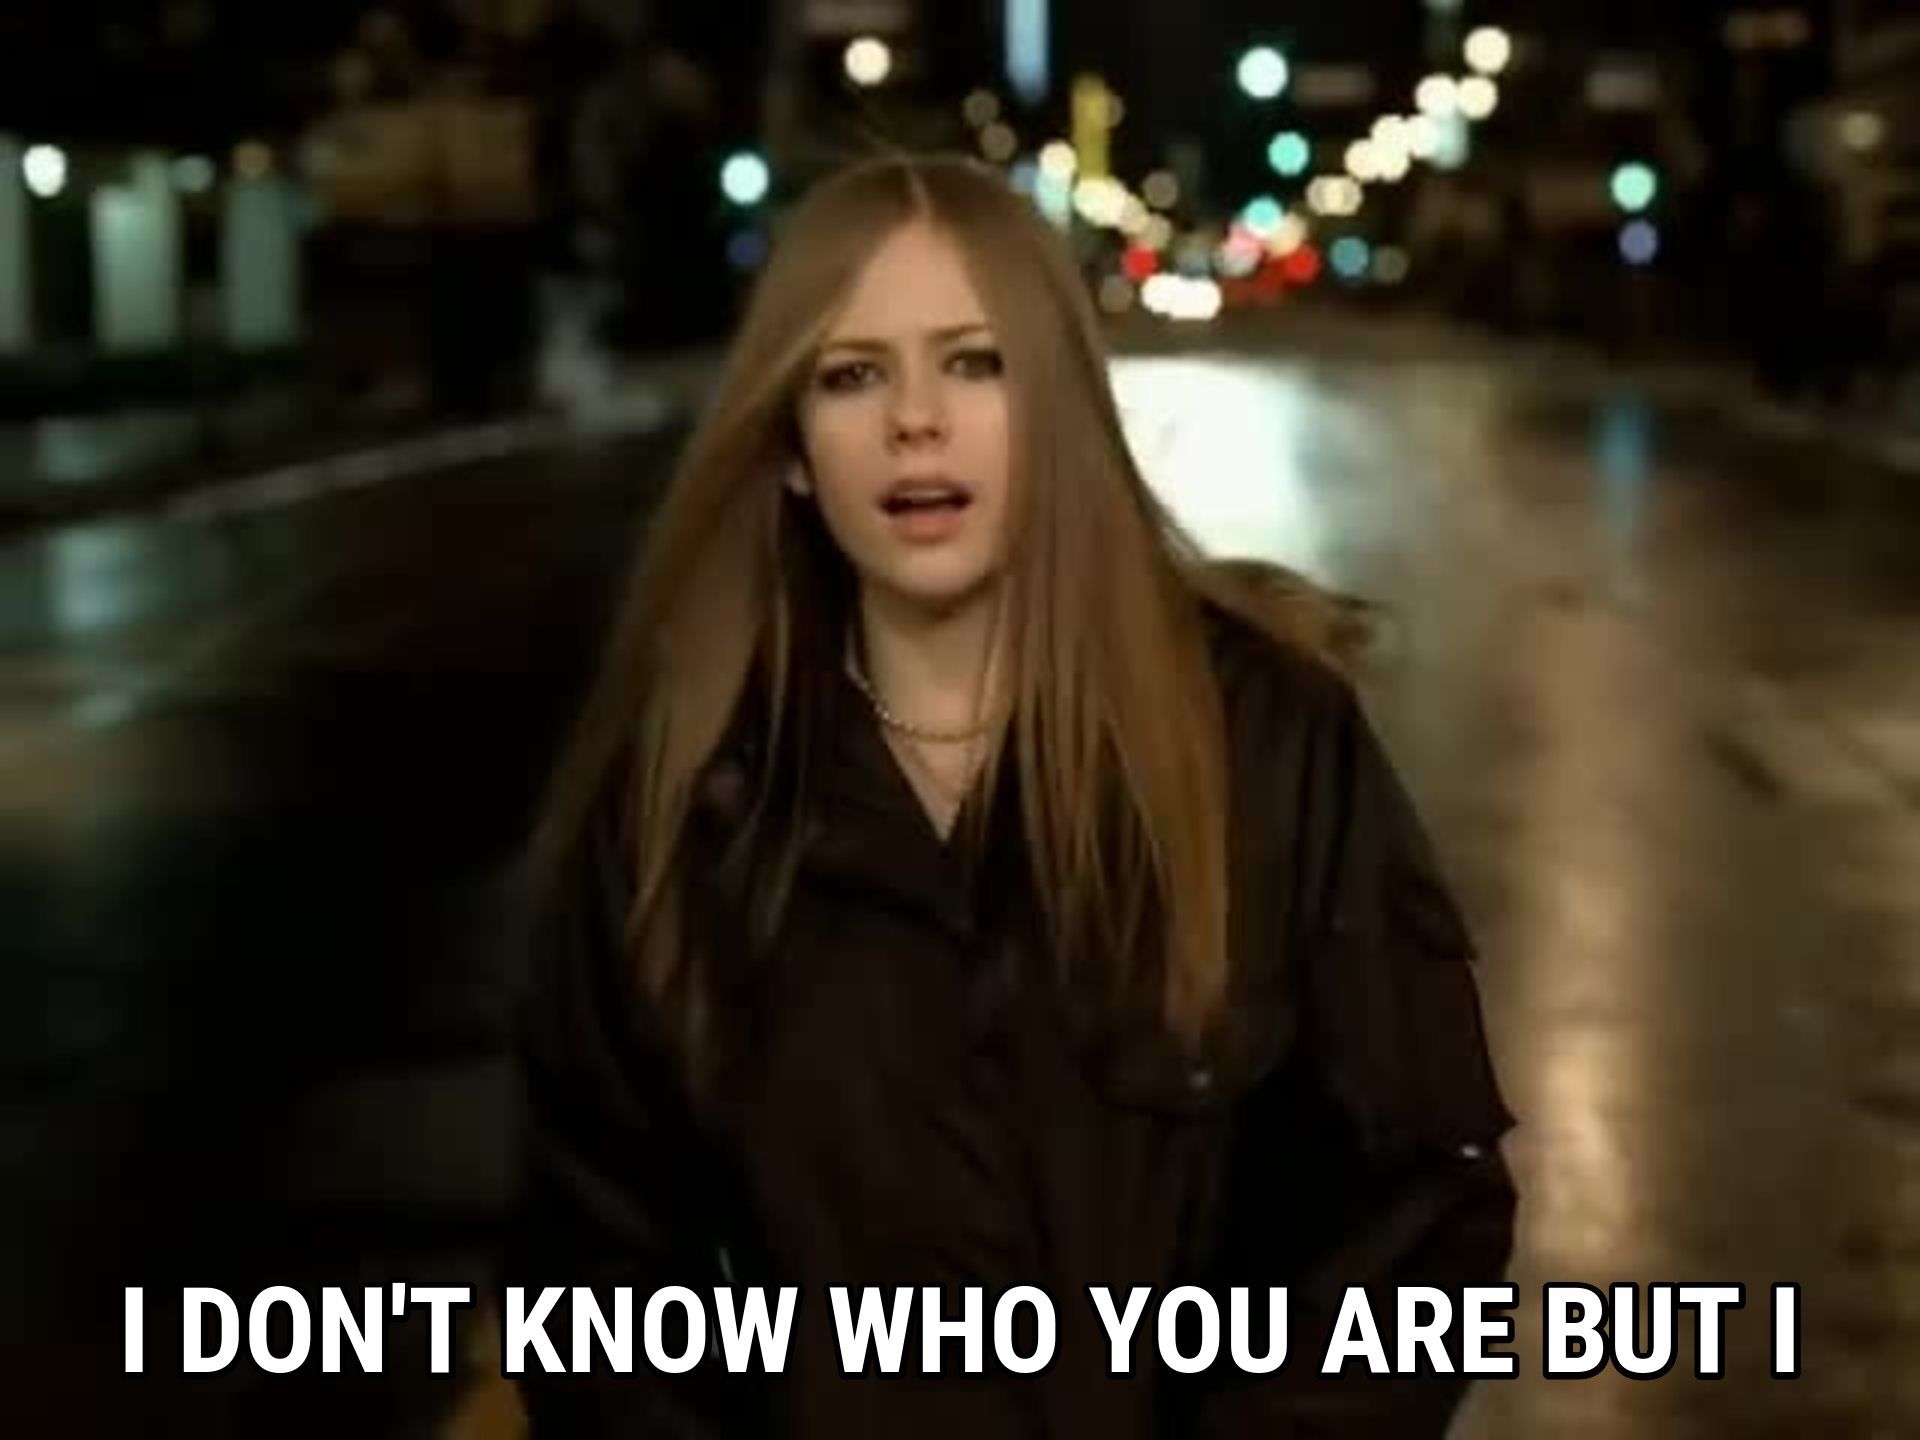 I'm with You lyrics Avril Lavigne song in image